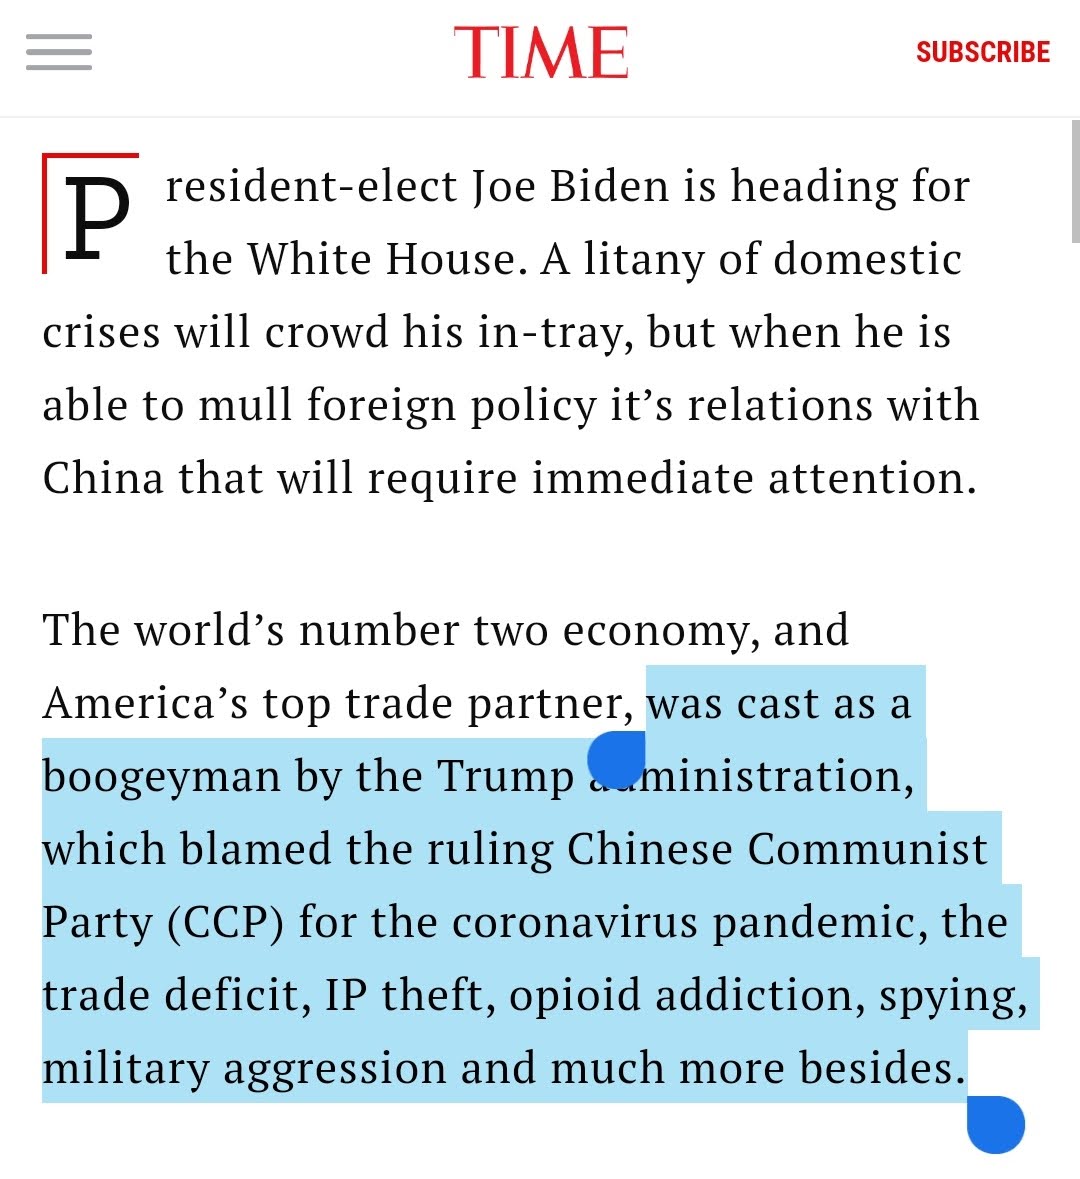 The article starts by casting doubt on Trump's policy of blaming China for the Coronavirus pandemic, IP theft, opioid addiction, spying, military aggression, etc. As if either a) Trump is the reason China was doing these things or b) Trump's tendency to blame China is bogus.